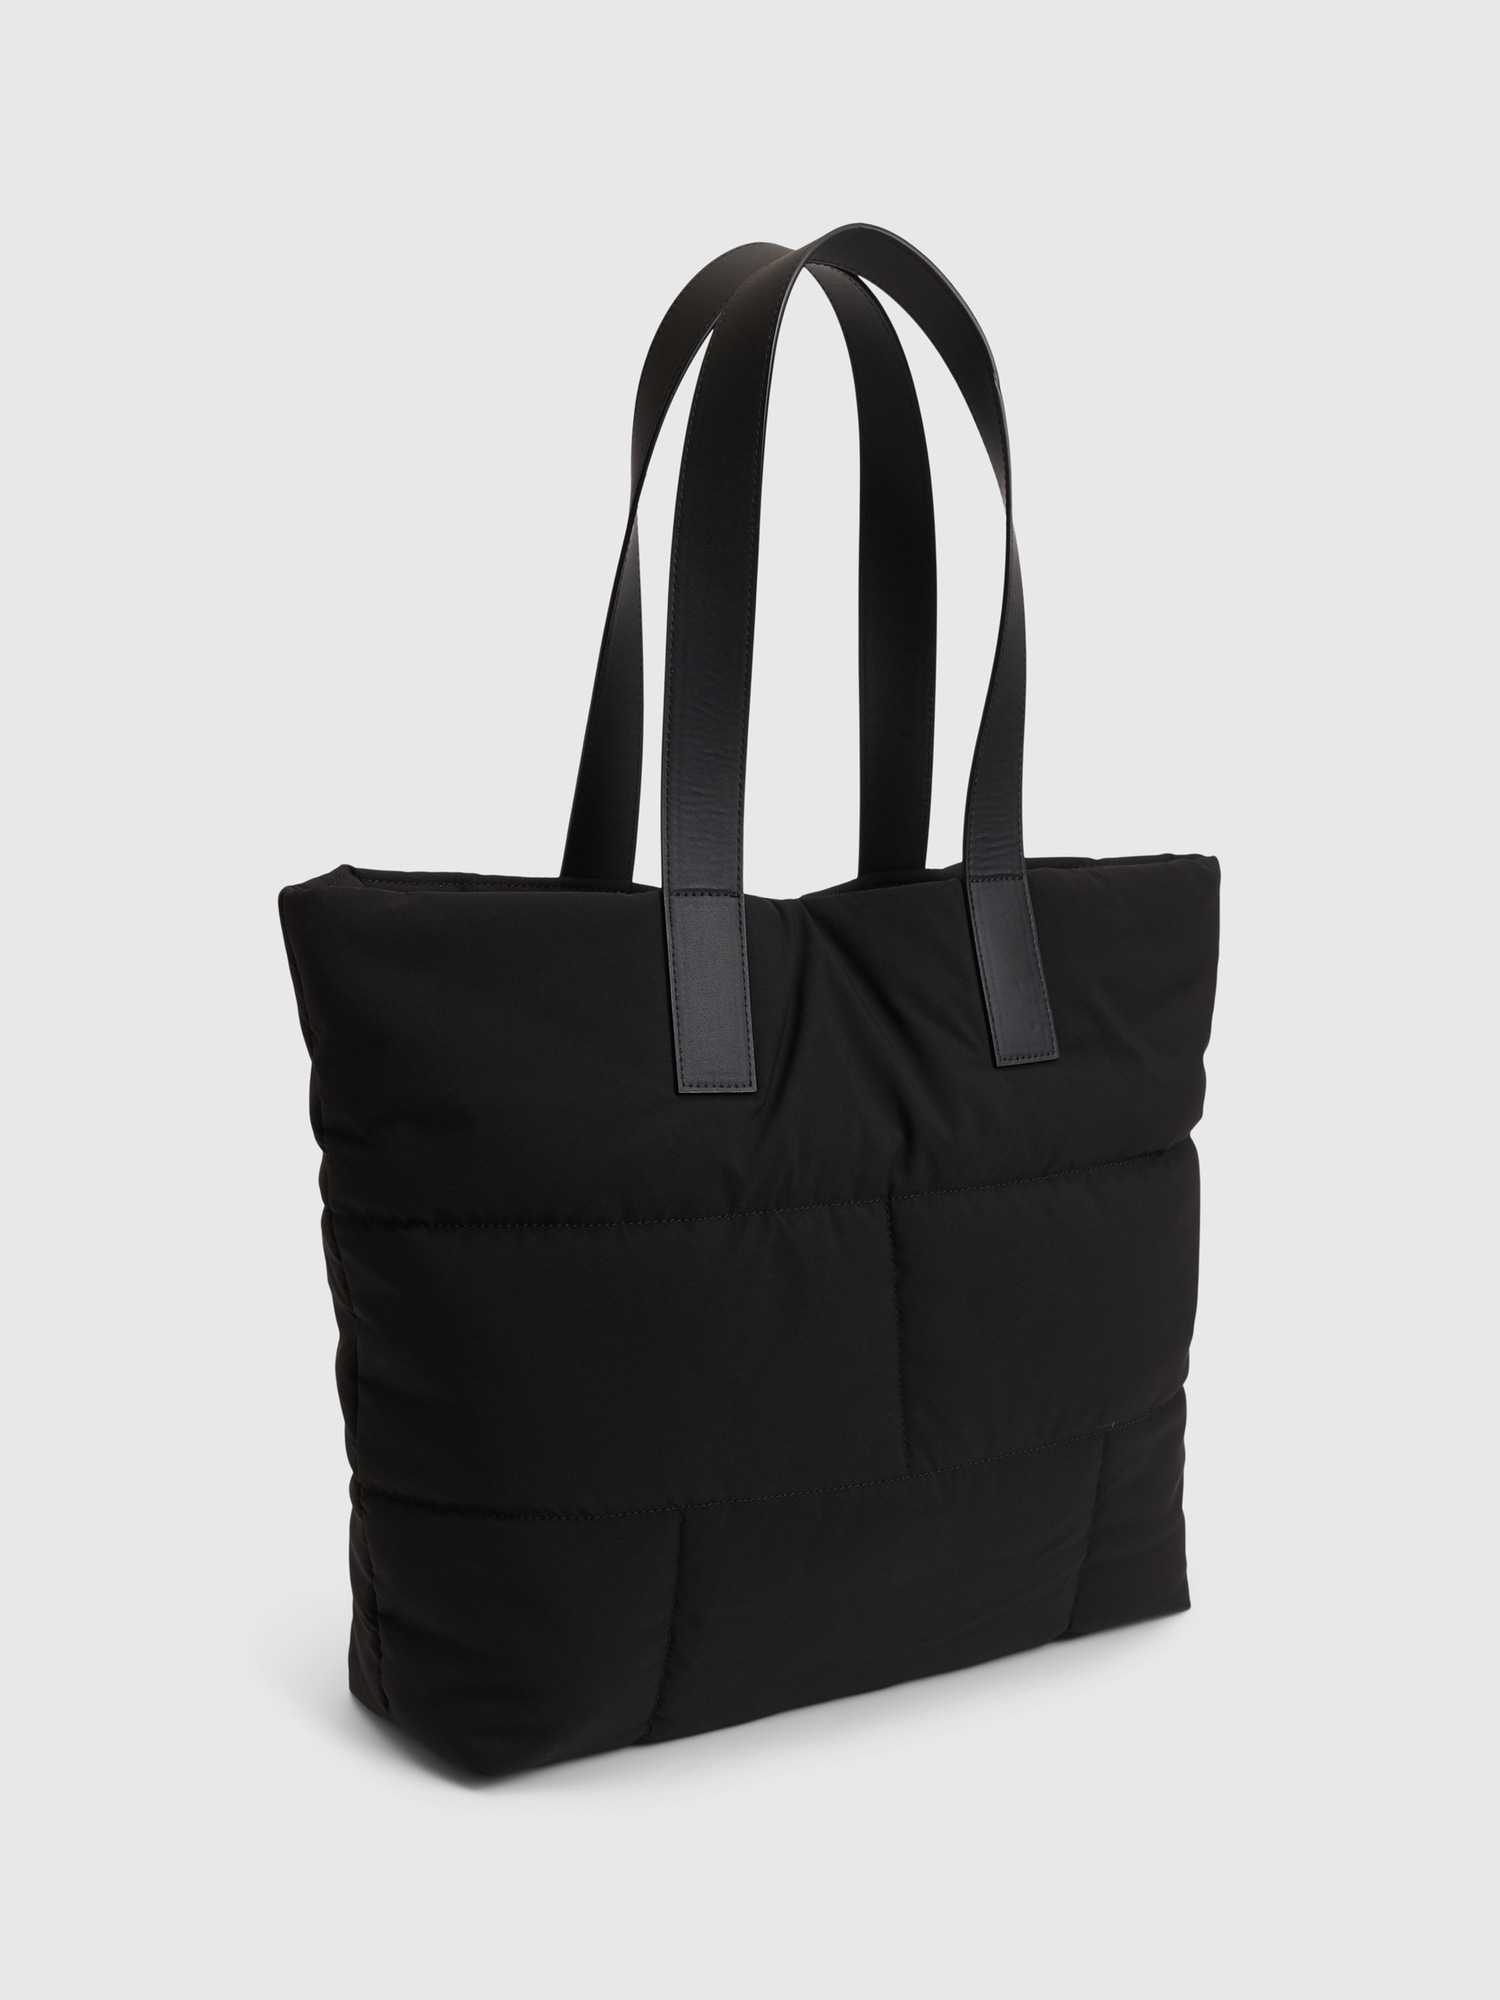 The Padded Re-Nylon Tote bag., Black, One Size